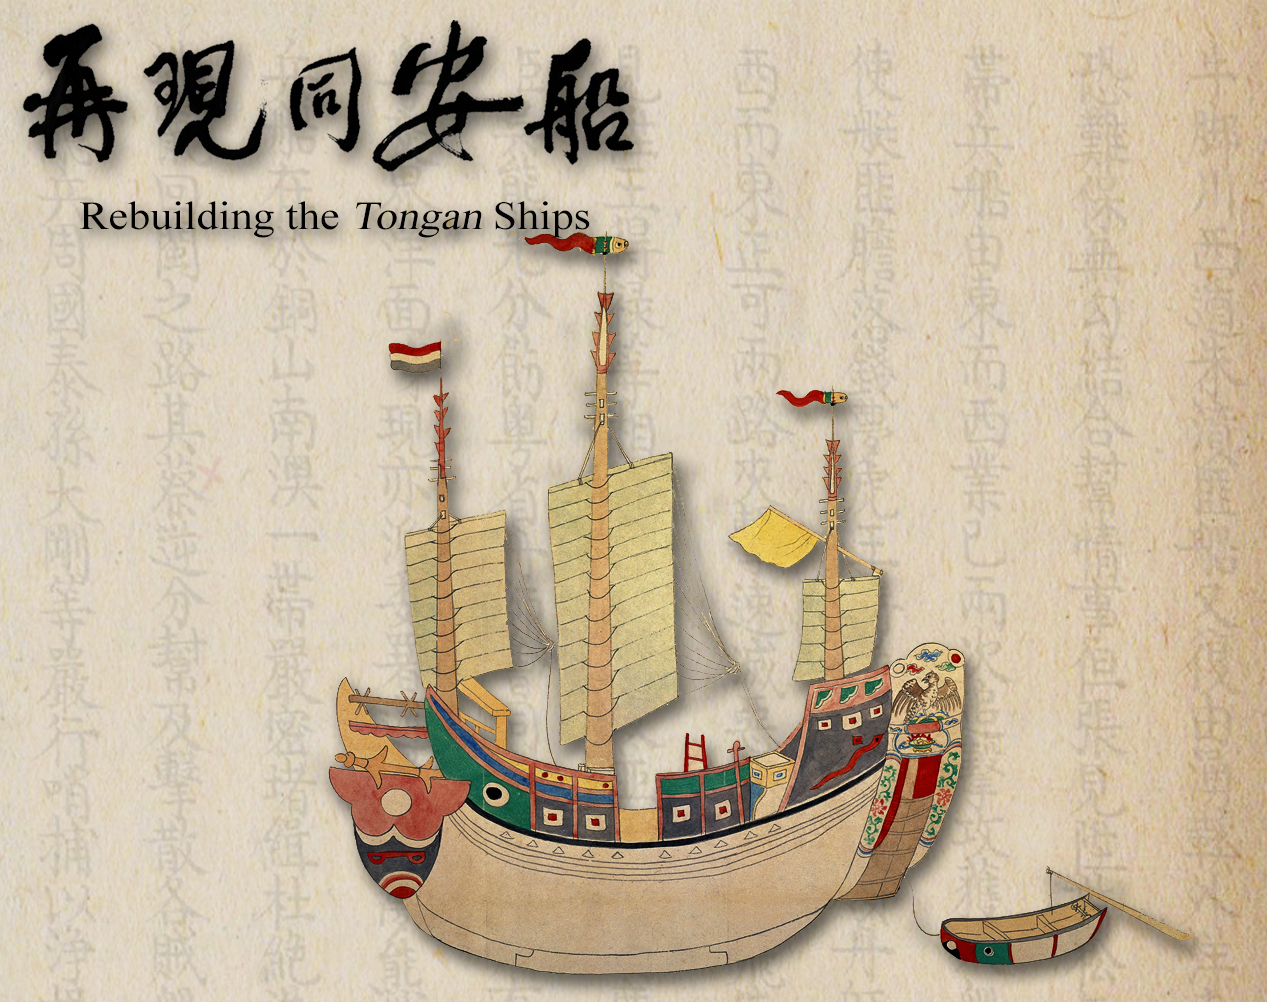 Theatre: Documentary Rebuilding the Tong-an Ships